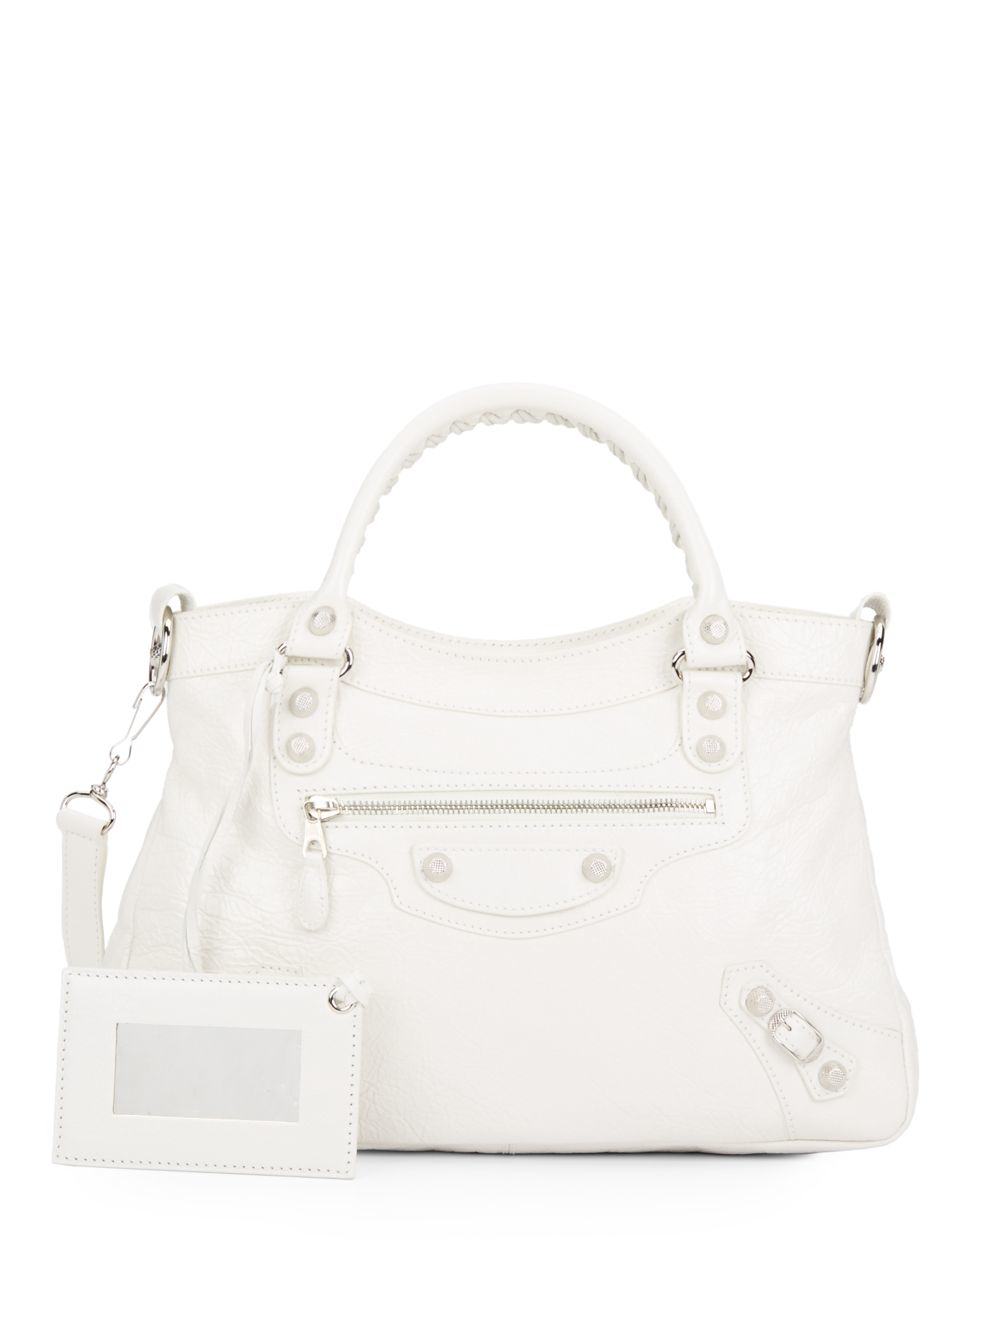 Balenciaga Leather Classic 12 Town Bag in Ivory (White) - Lyst